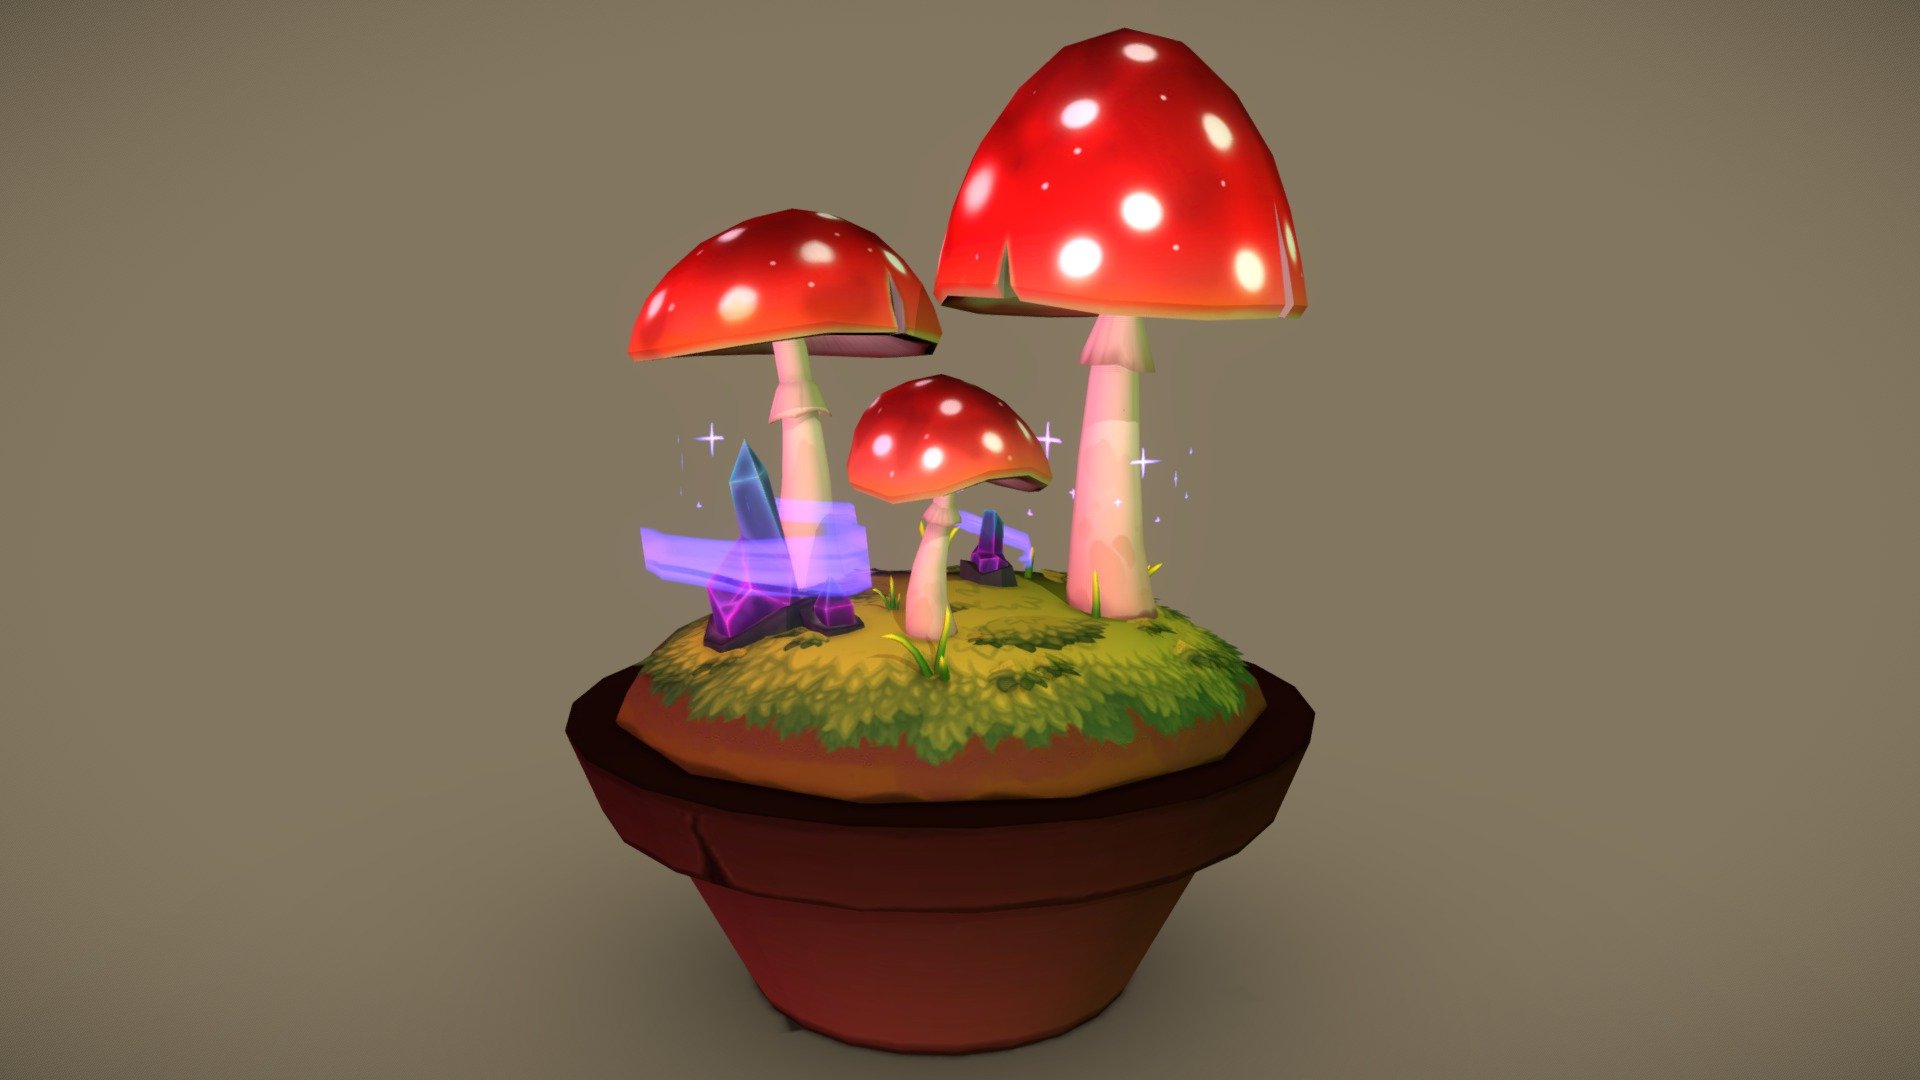 This is a small Diorama project I created. All the textures are handpainted! - Stylized Lowpoly Mushroom Garden Diorama - 3D model by Fulutu 3d model